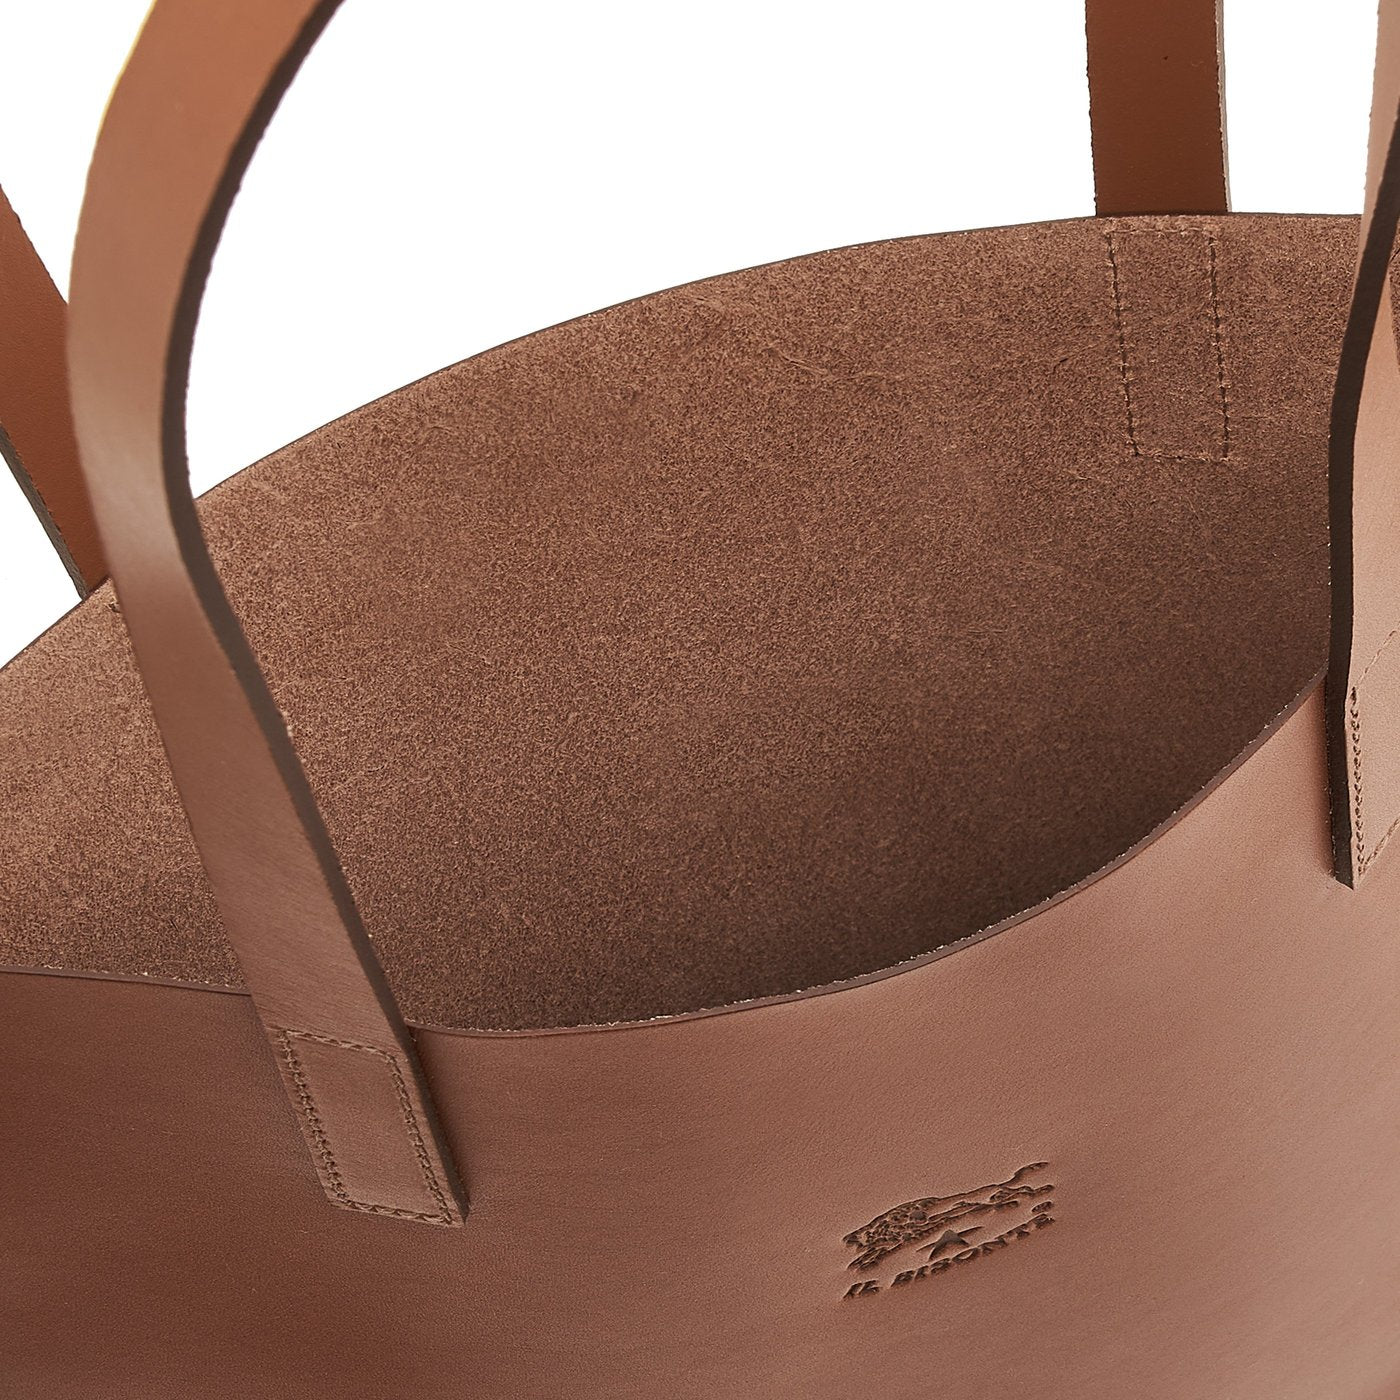 Cassiopea | Women's tote bag in leather color chocolate